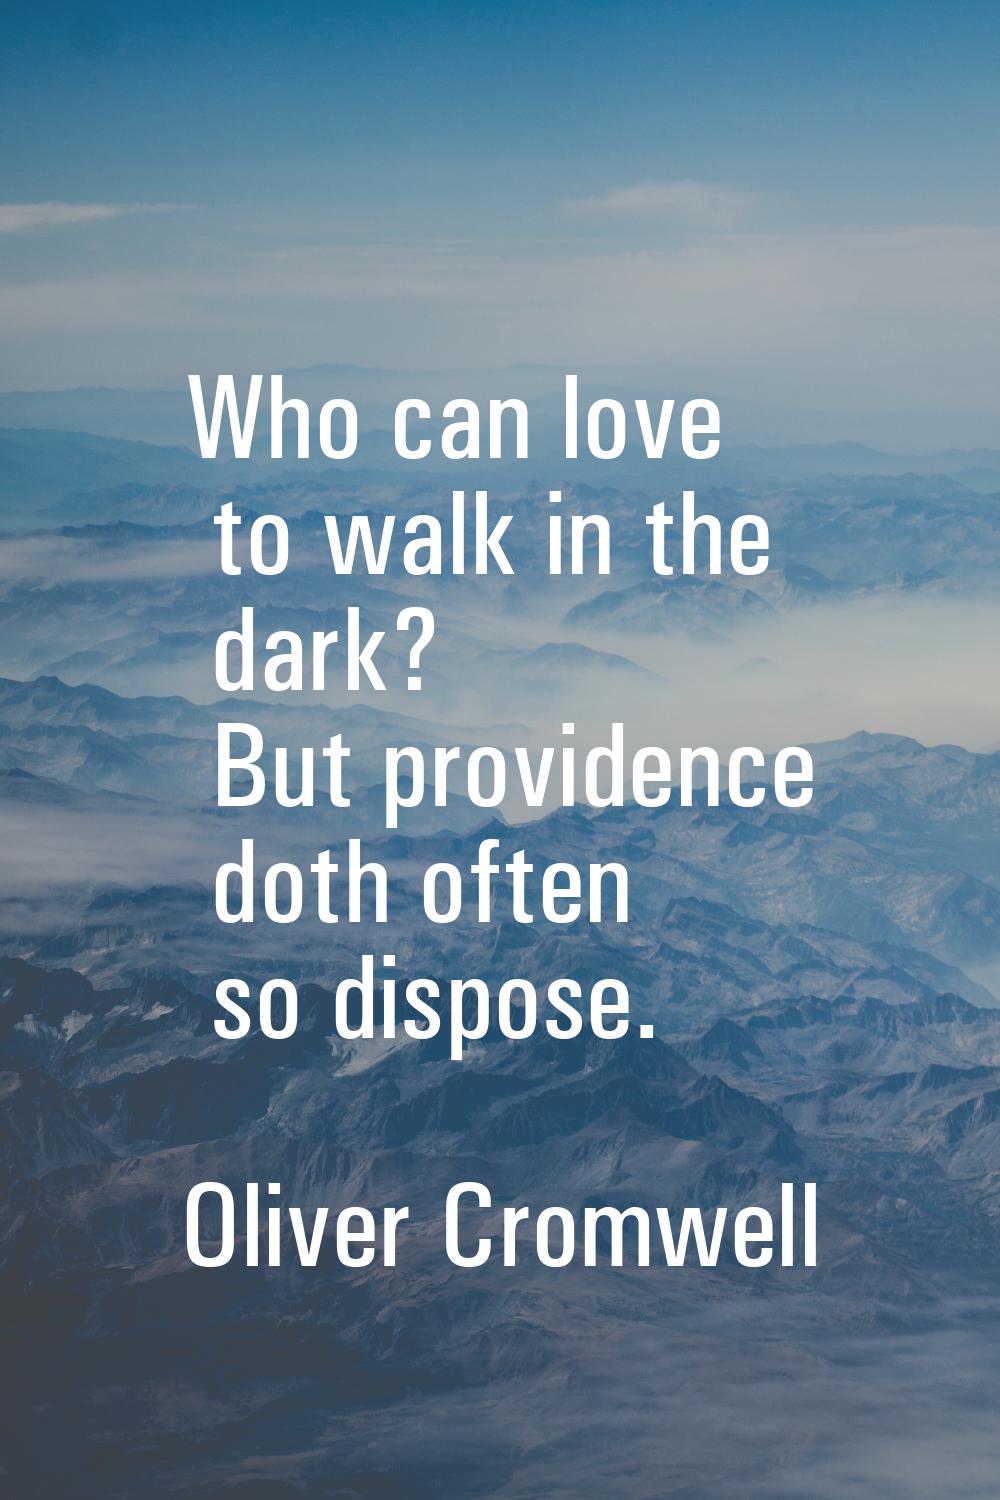 Who can love to walk in the dark? But providence doth often so dispose.